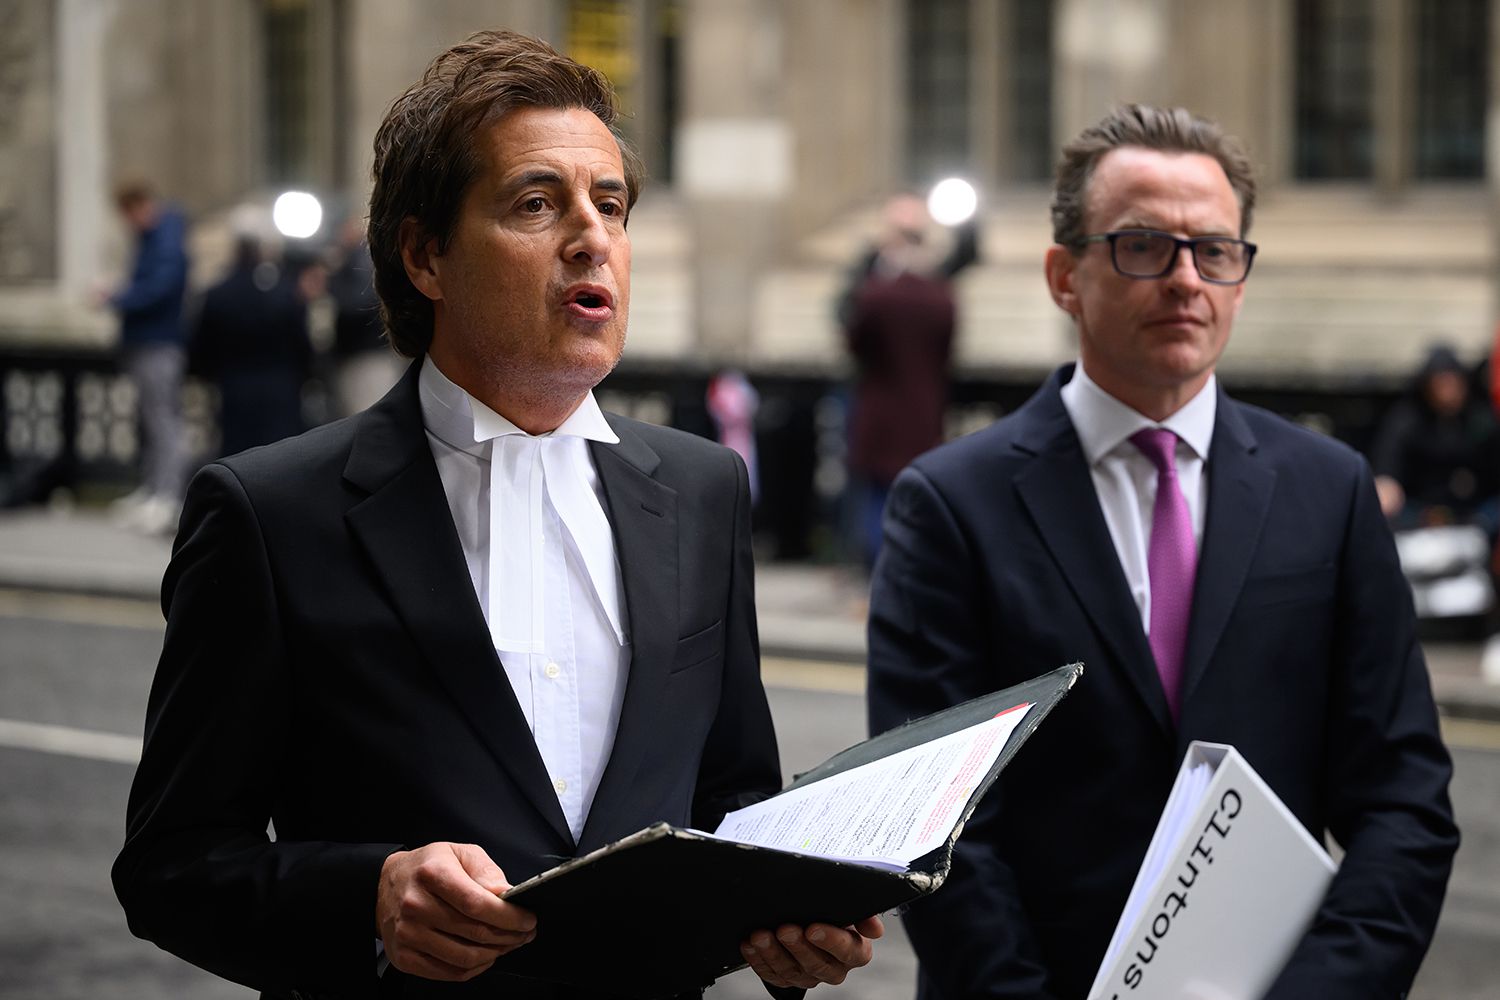 David Sherbourne reads a written statement on behalf of his legal client Prince Harry following the ruling in his favour in a lawsuit against the Mirror Group on December 15, 2023 in London, England